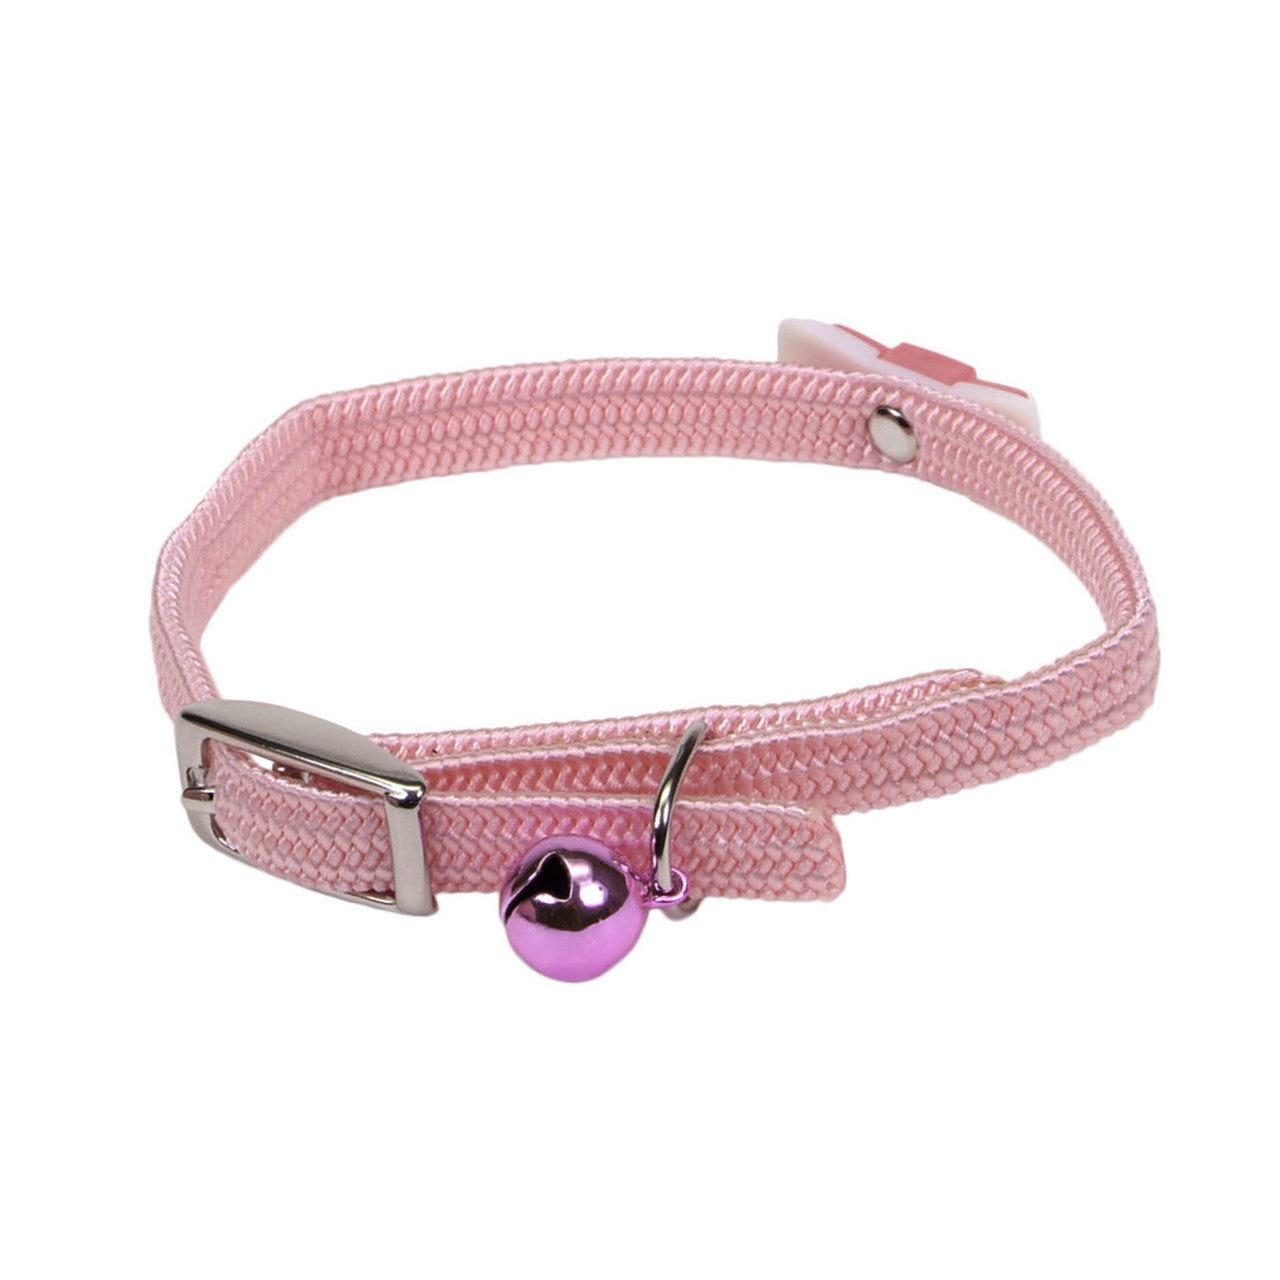 Lil Pals Elasticized Safety Kitten Collar with Jeweled Bow Pink 3/8 in x 8 in